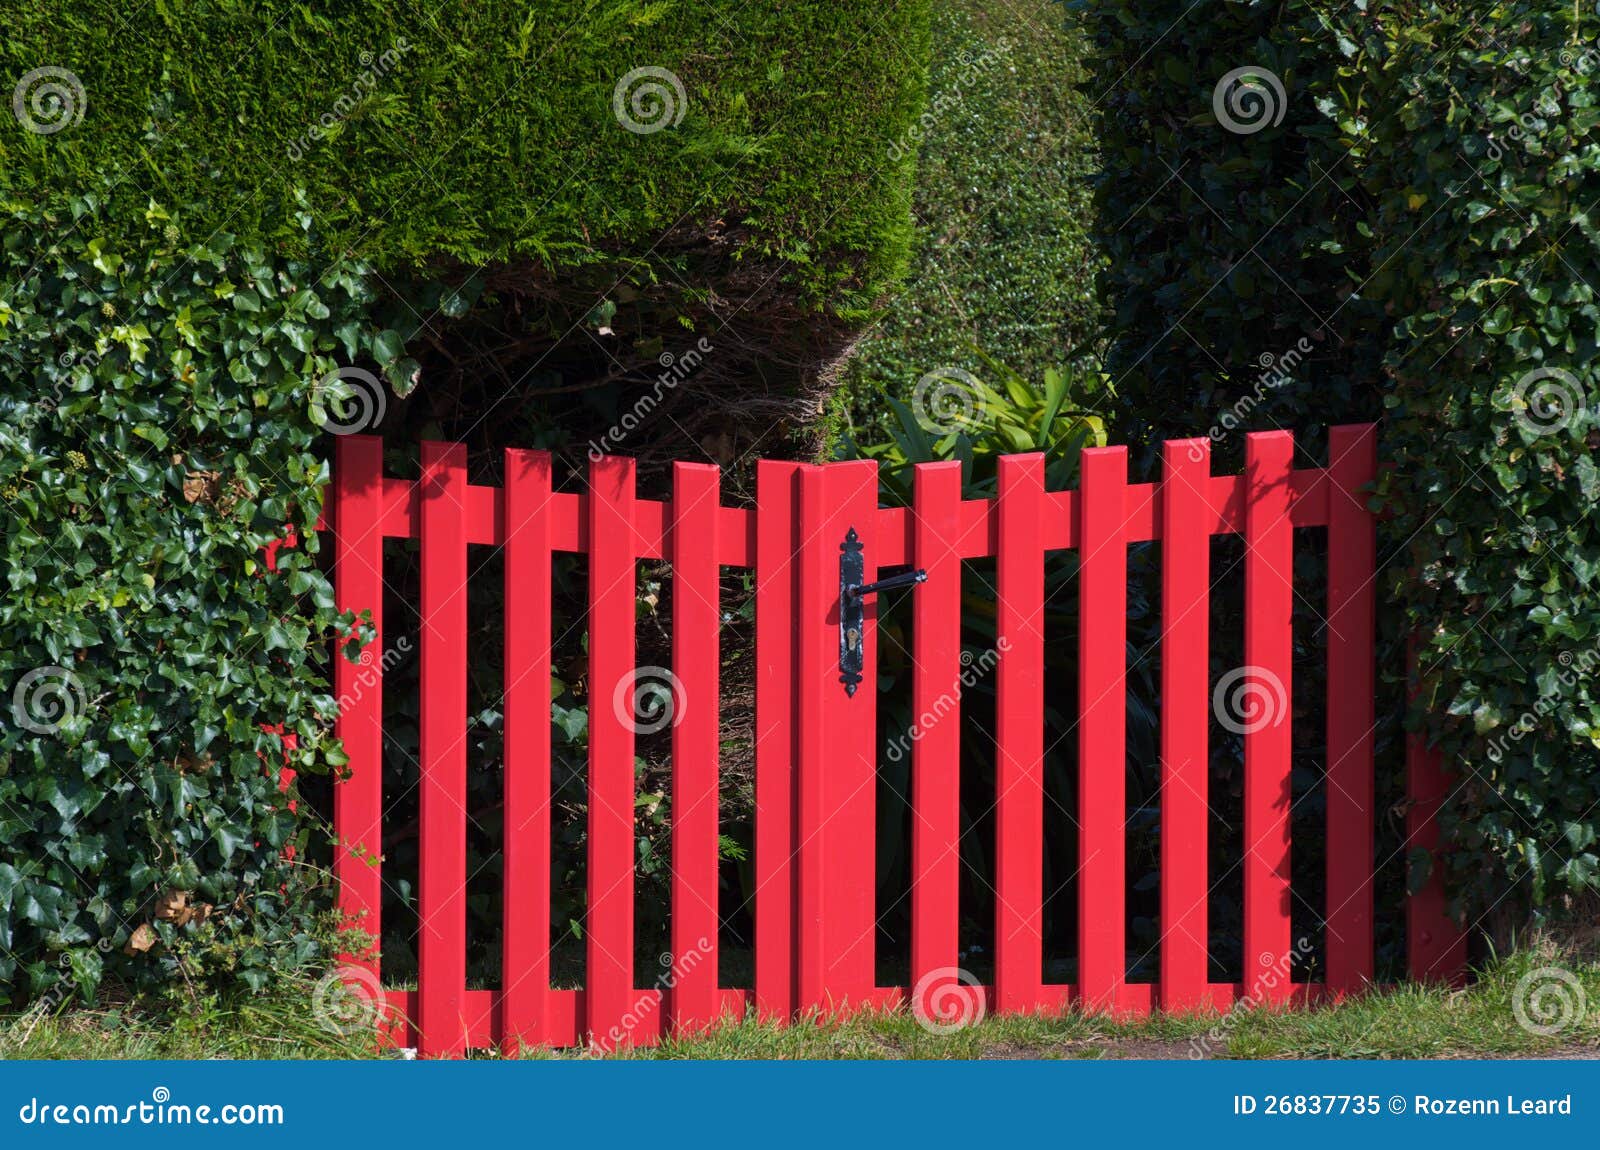 94,019 Gate Photos - Free & Royalty-Free Photos from Dreamstime